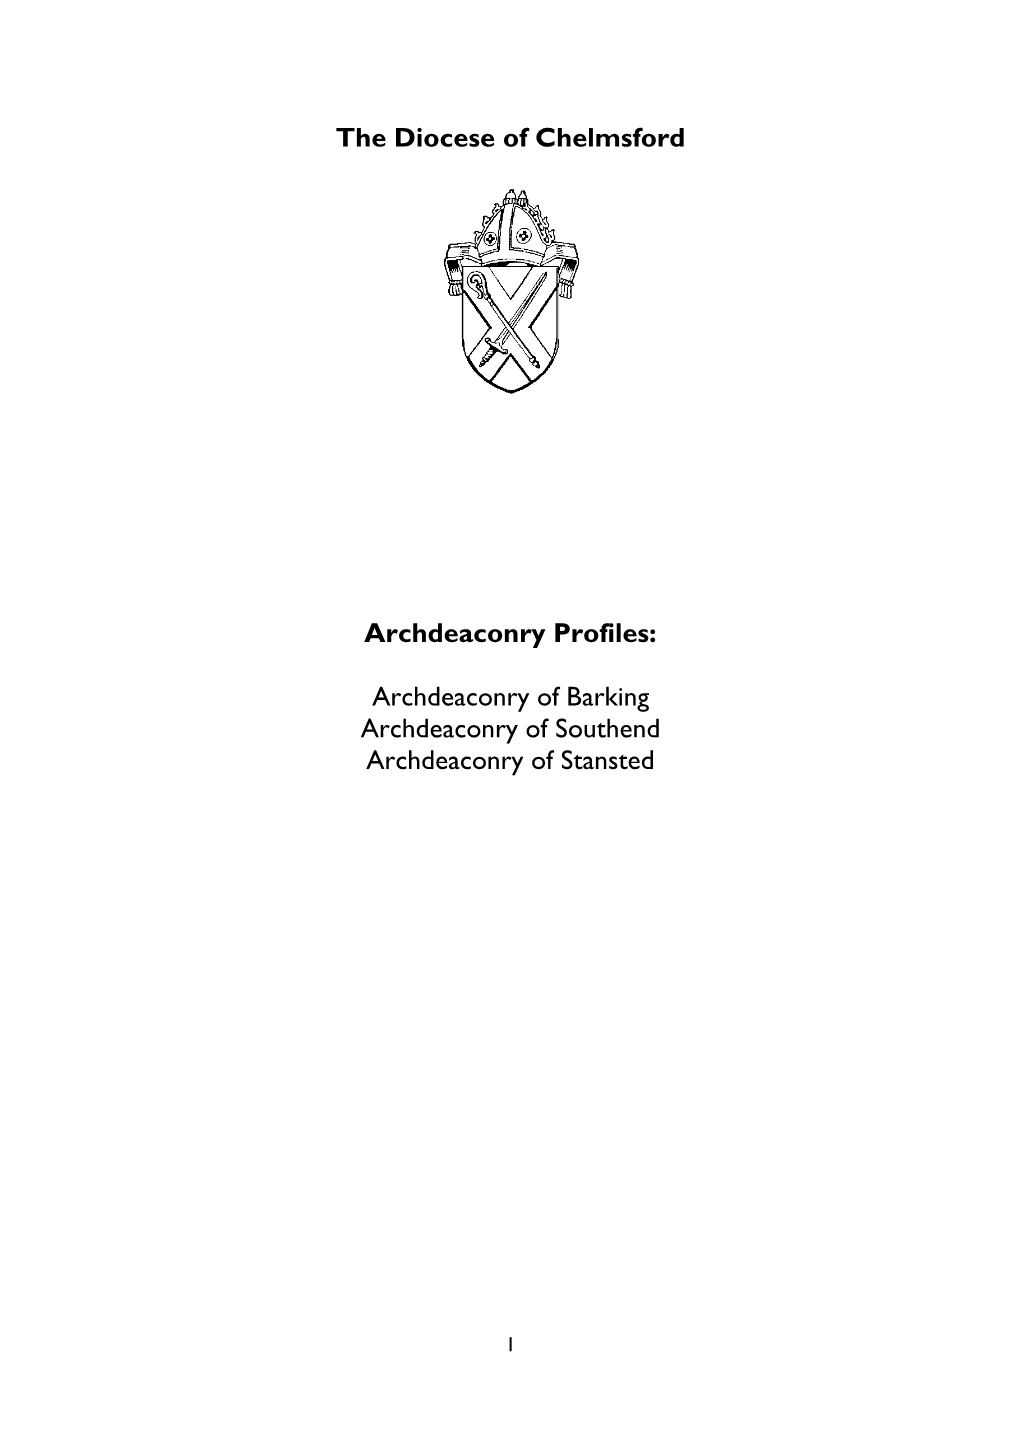 The Diocese of Chelmsford Archdeaconry Profiles